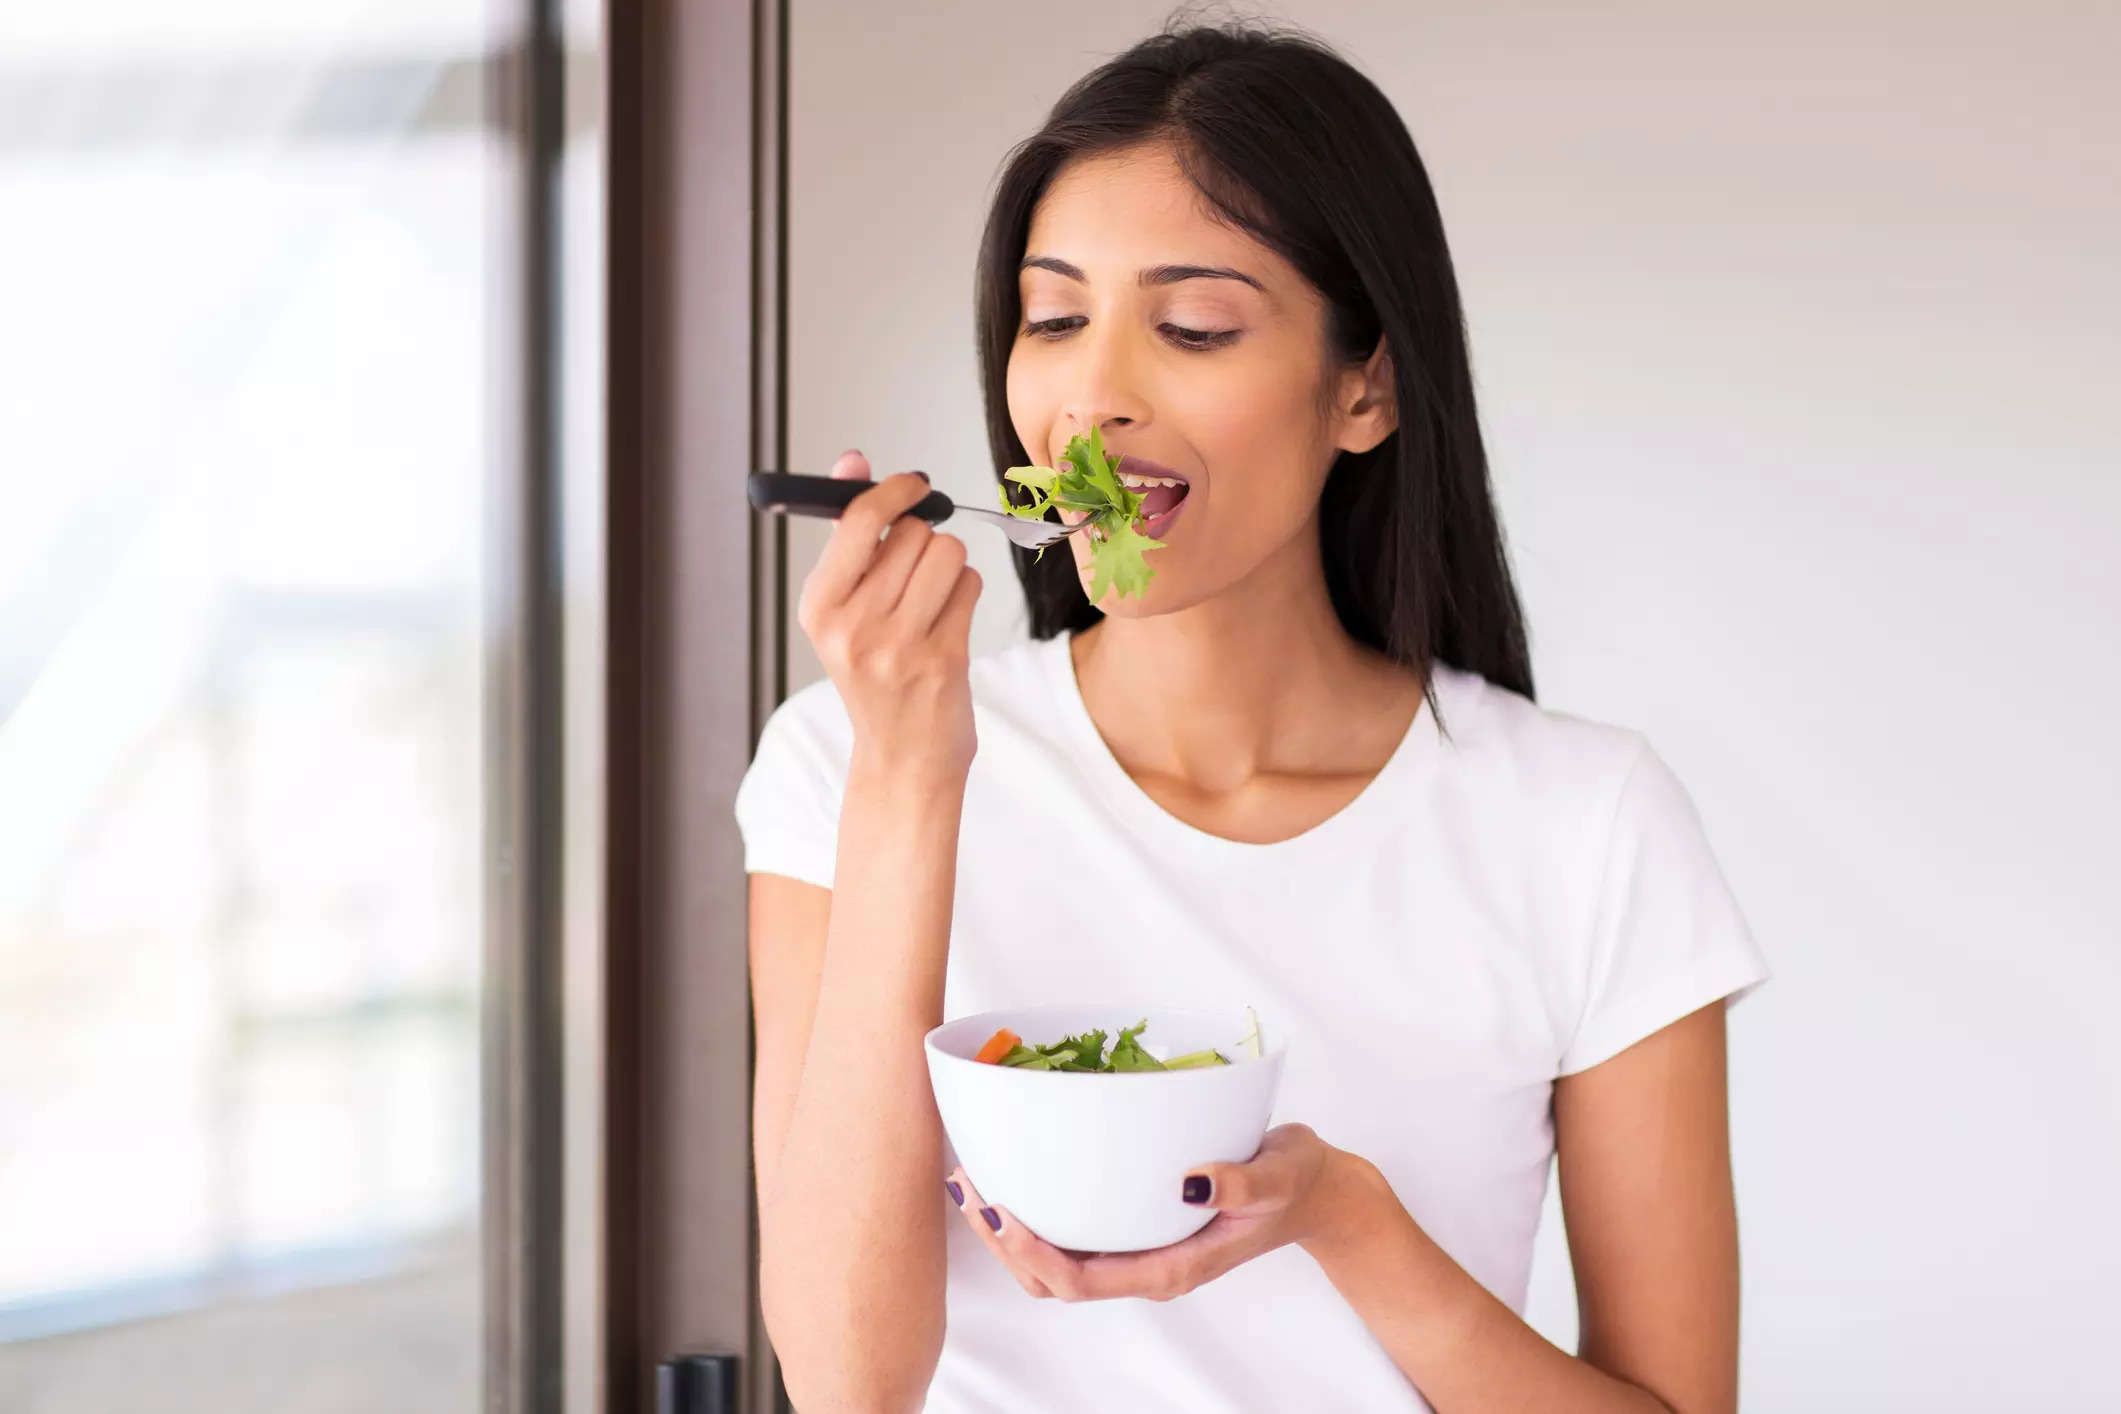 Need a happy hormone boost? These nutrition hacks could help